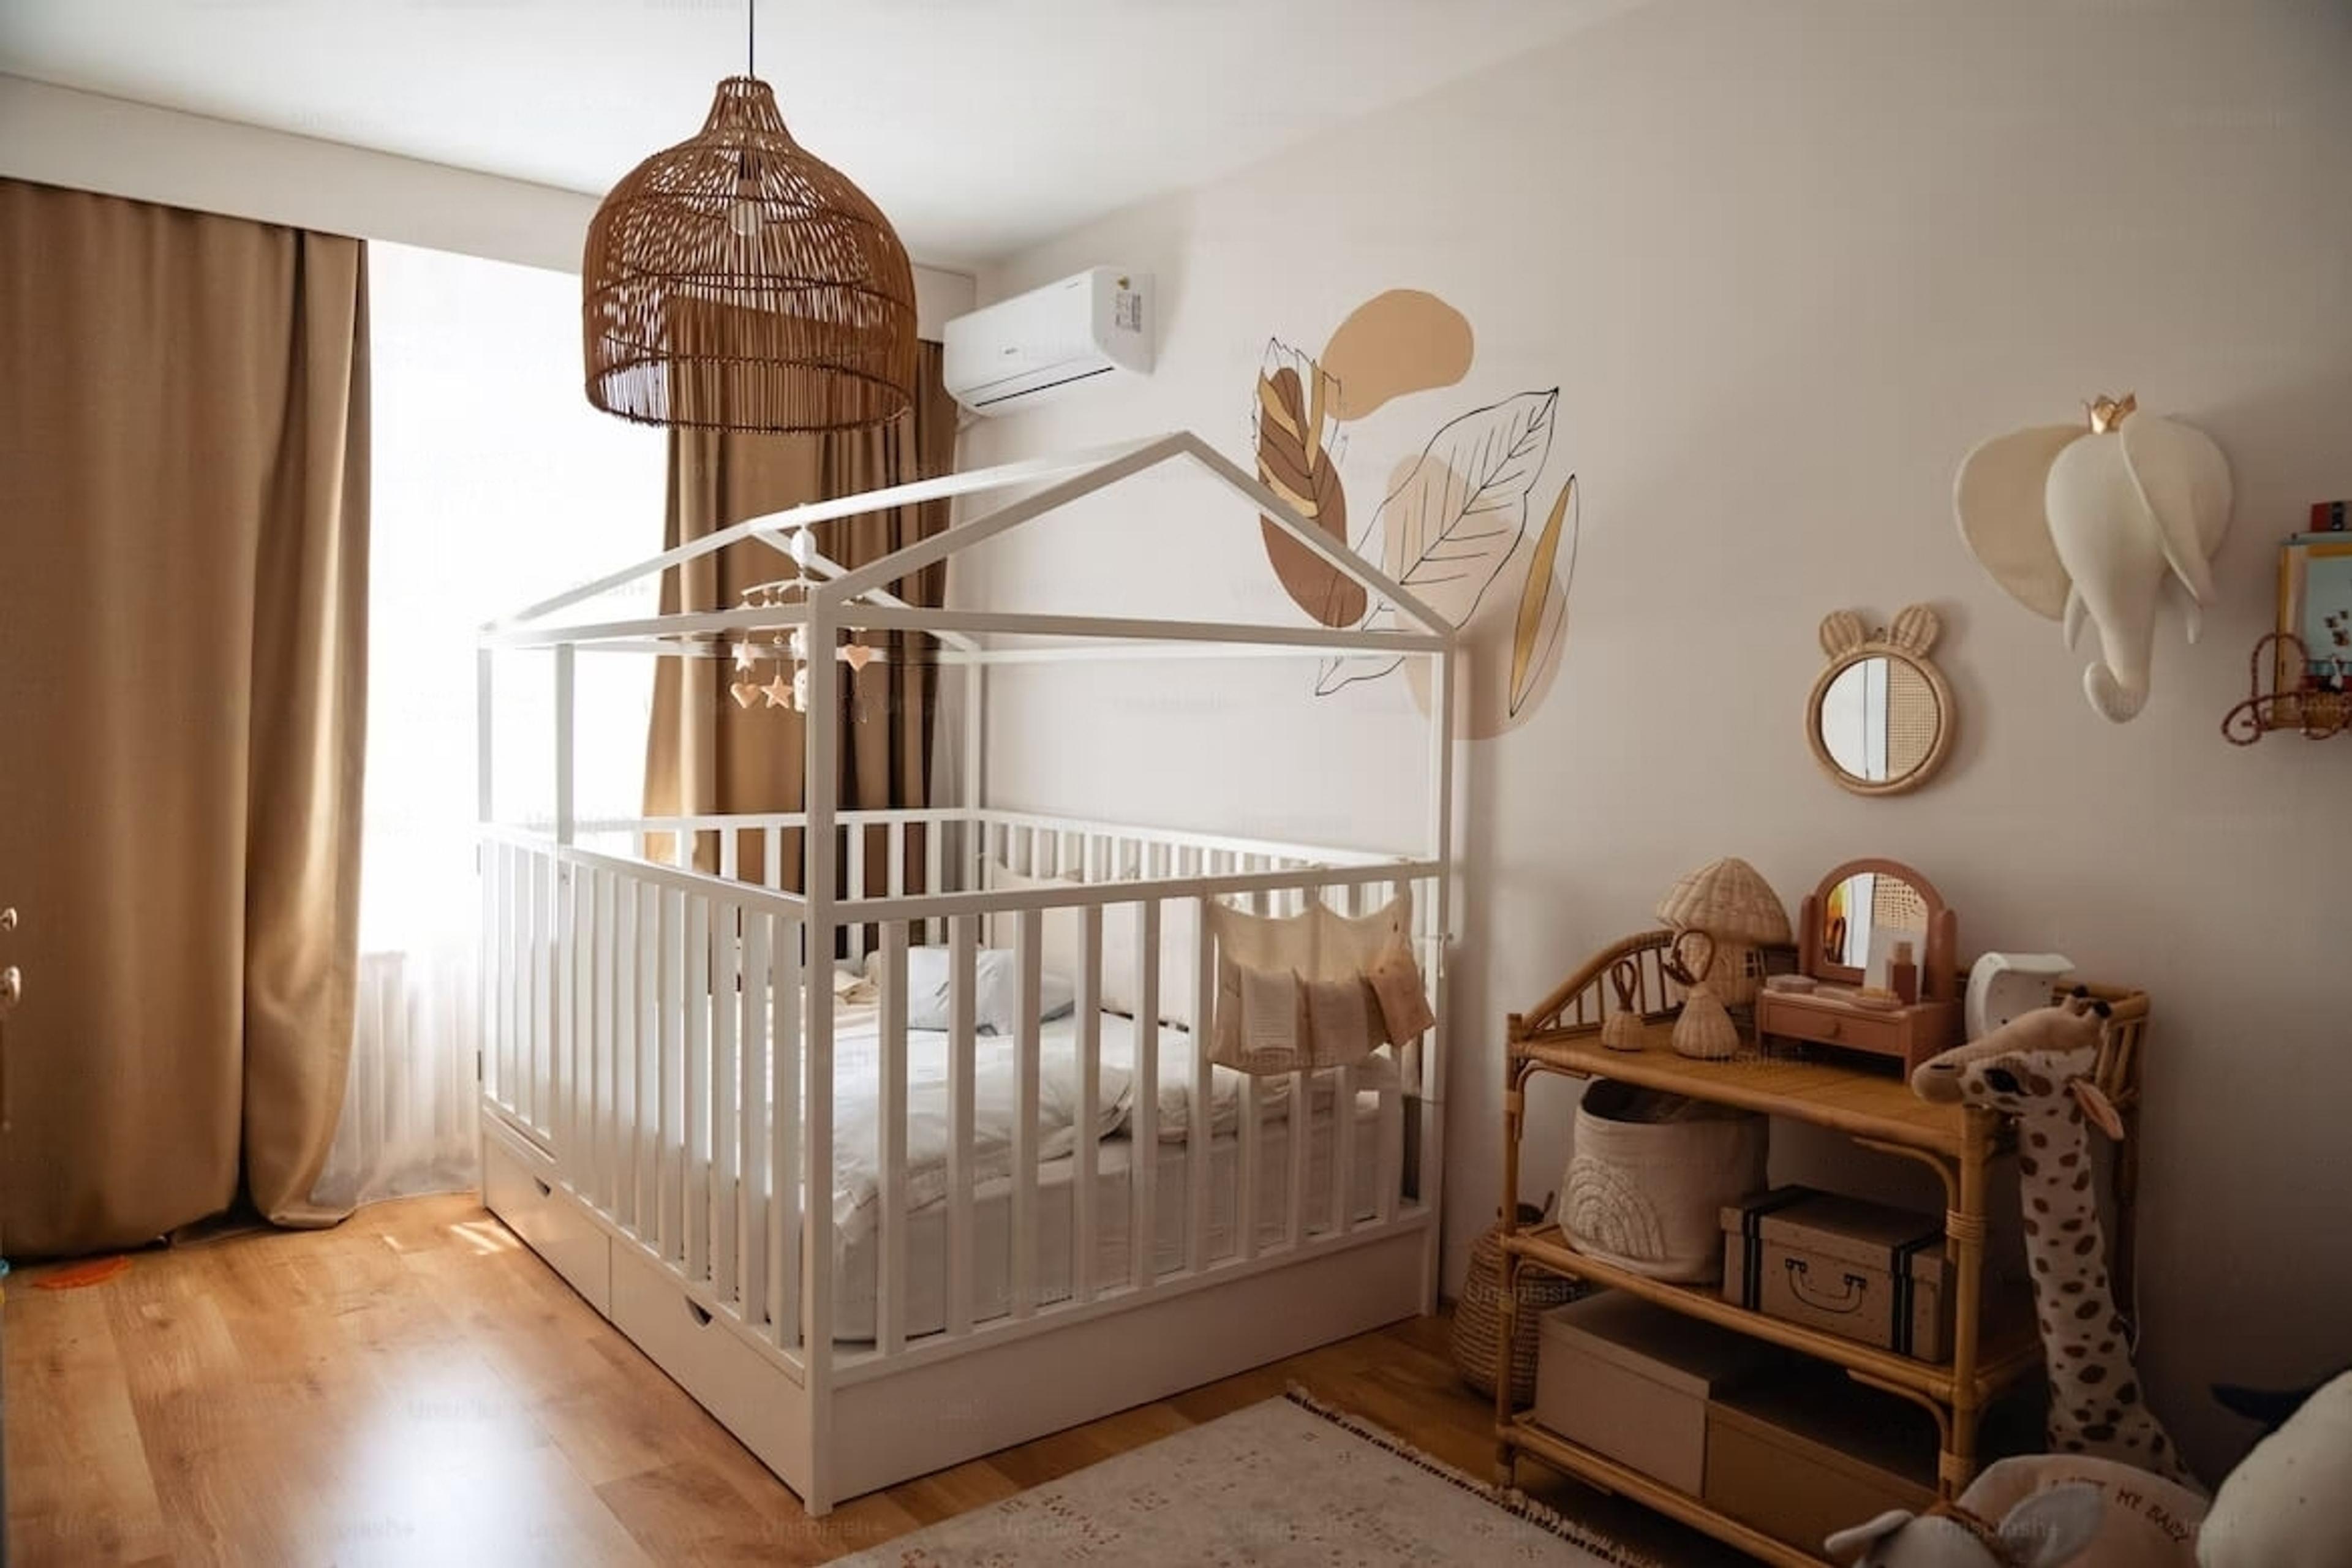 Crib-to-Floor Bed Conversion